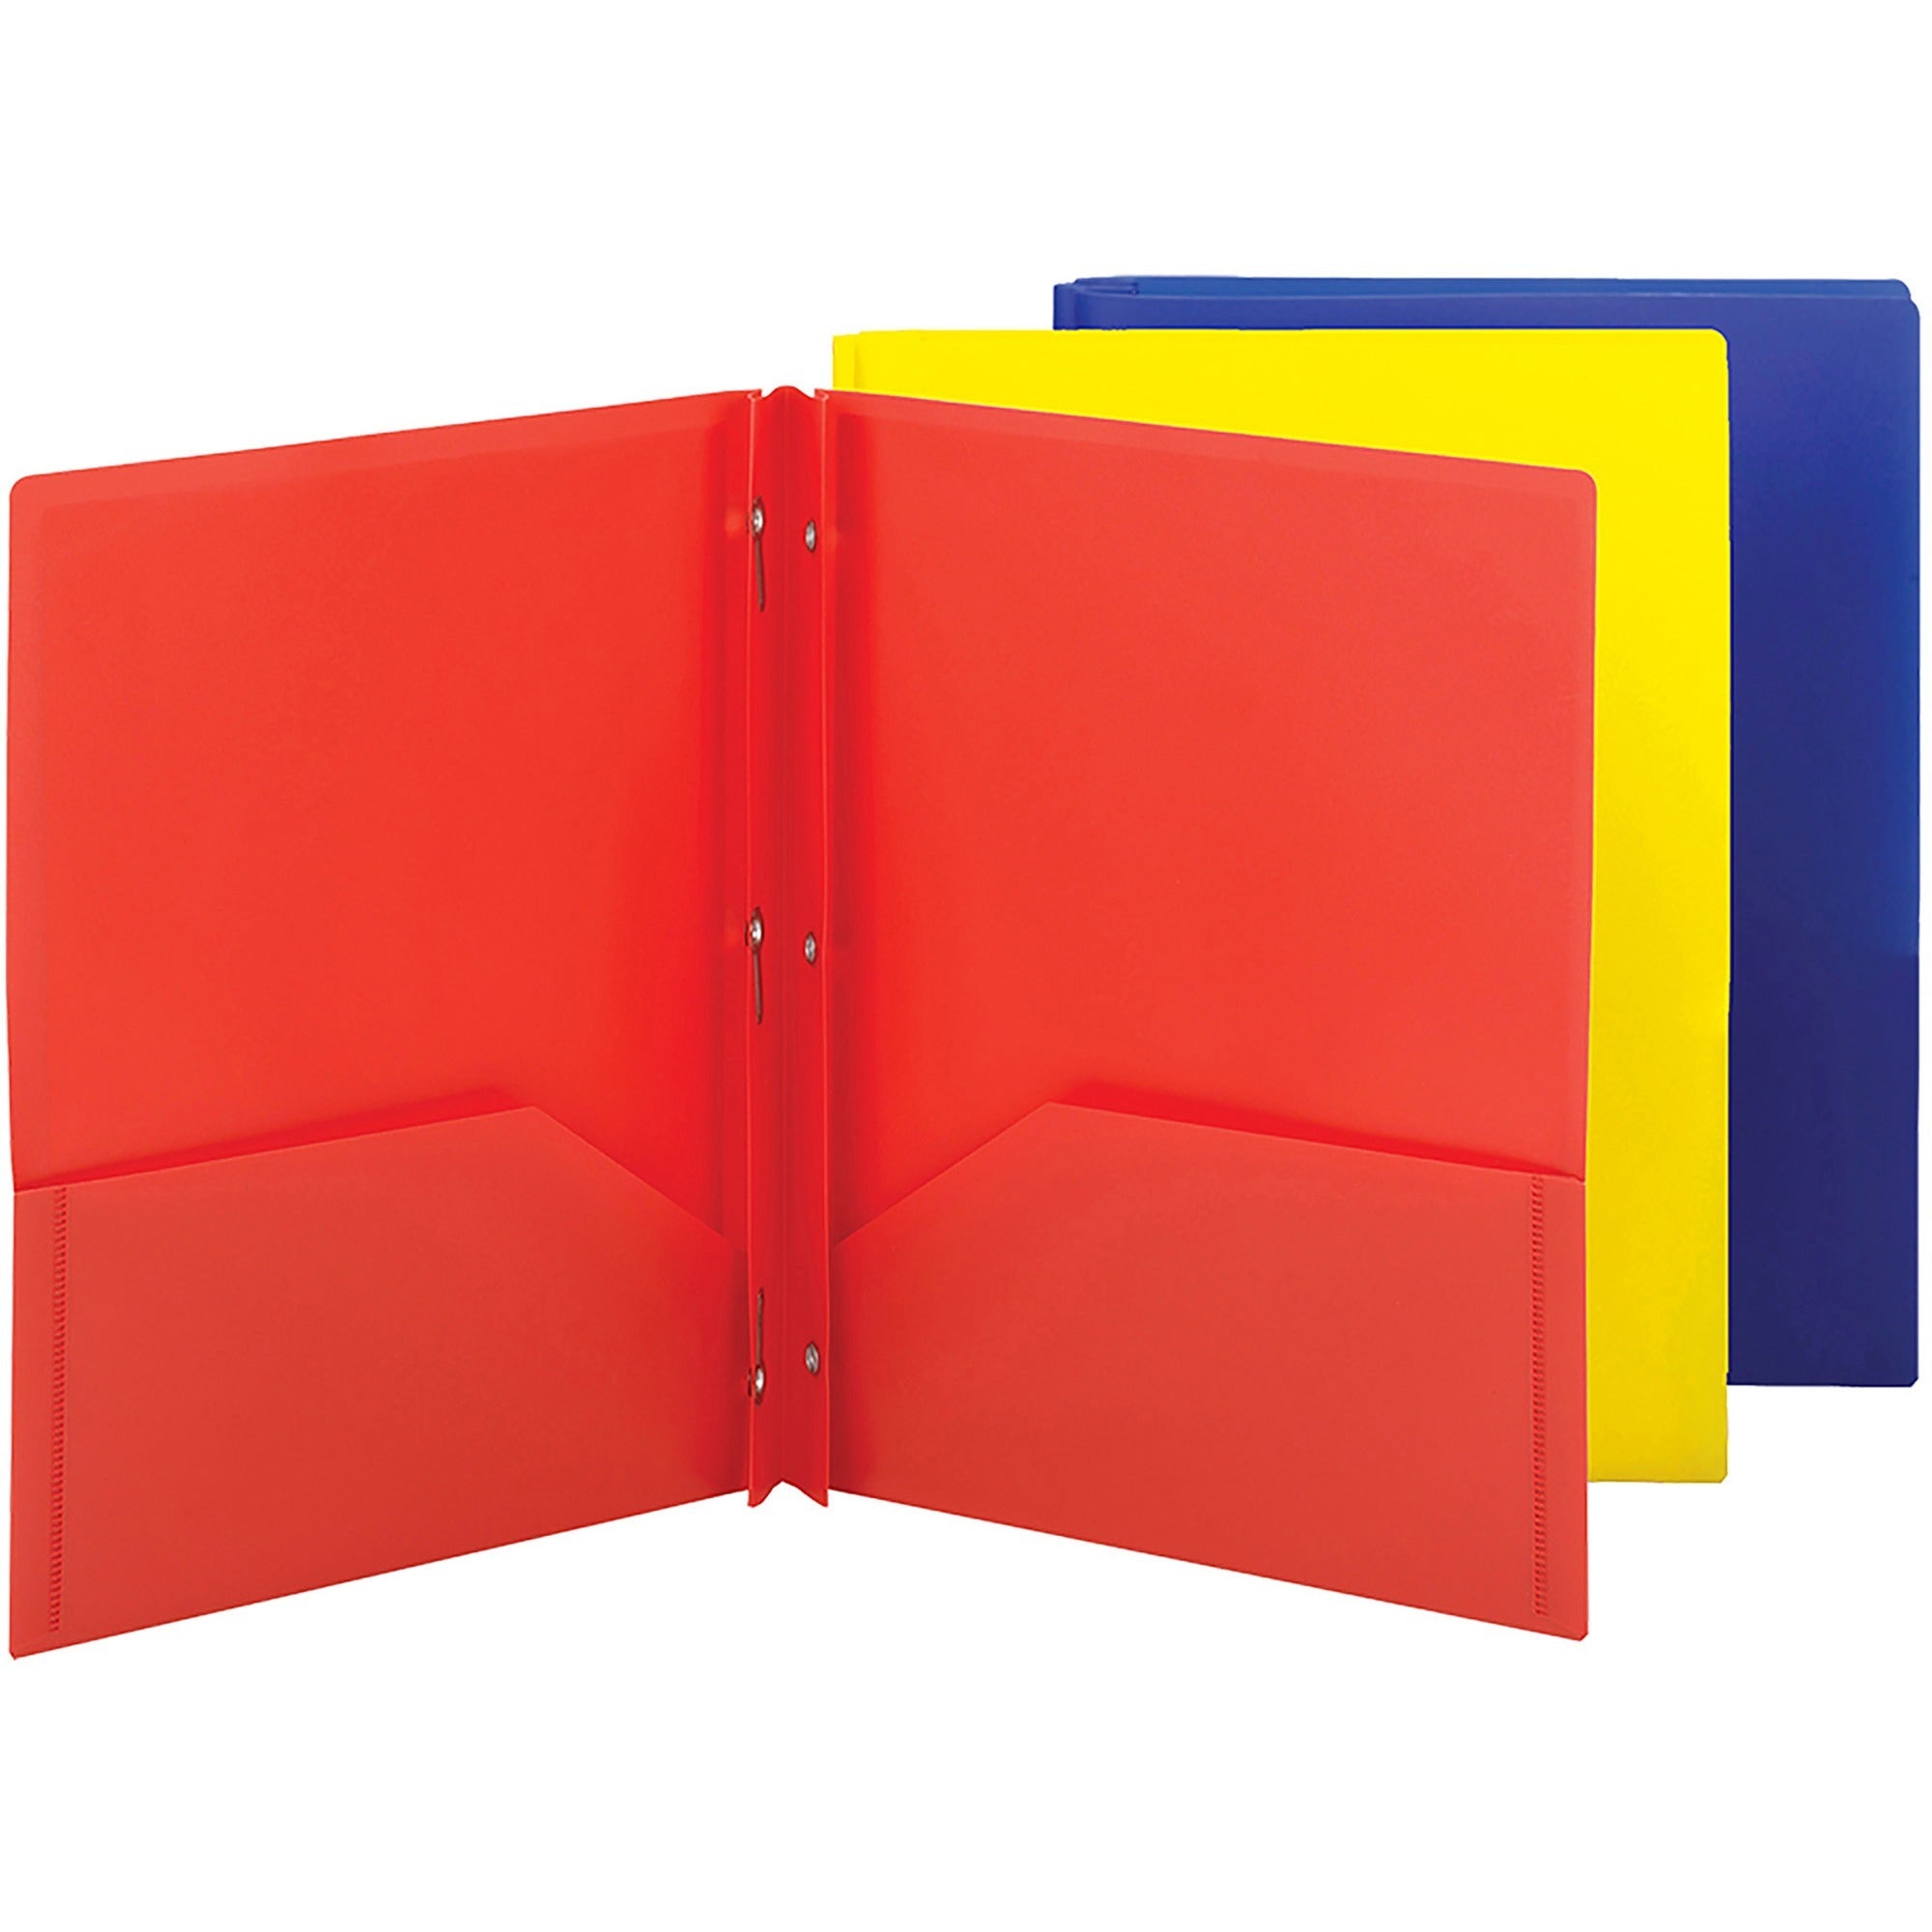 smead-letter-fastener-folder-8-1-2-x-11-180-sheet-capacity-2-x-double-tang-fasteners-2-inside-back-pockets-red-yellow-blue-72-carton_smd87738 - 1